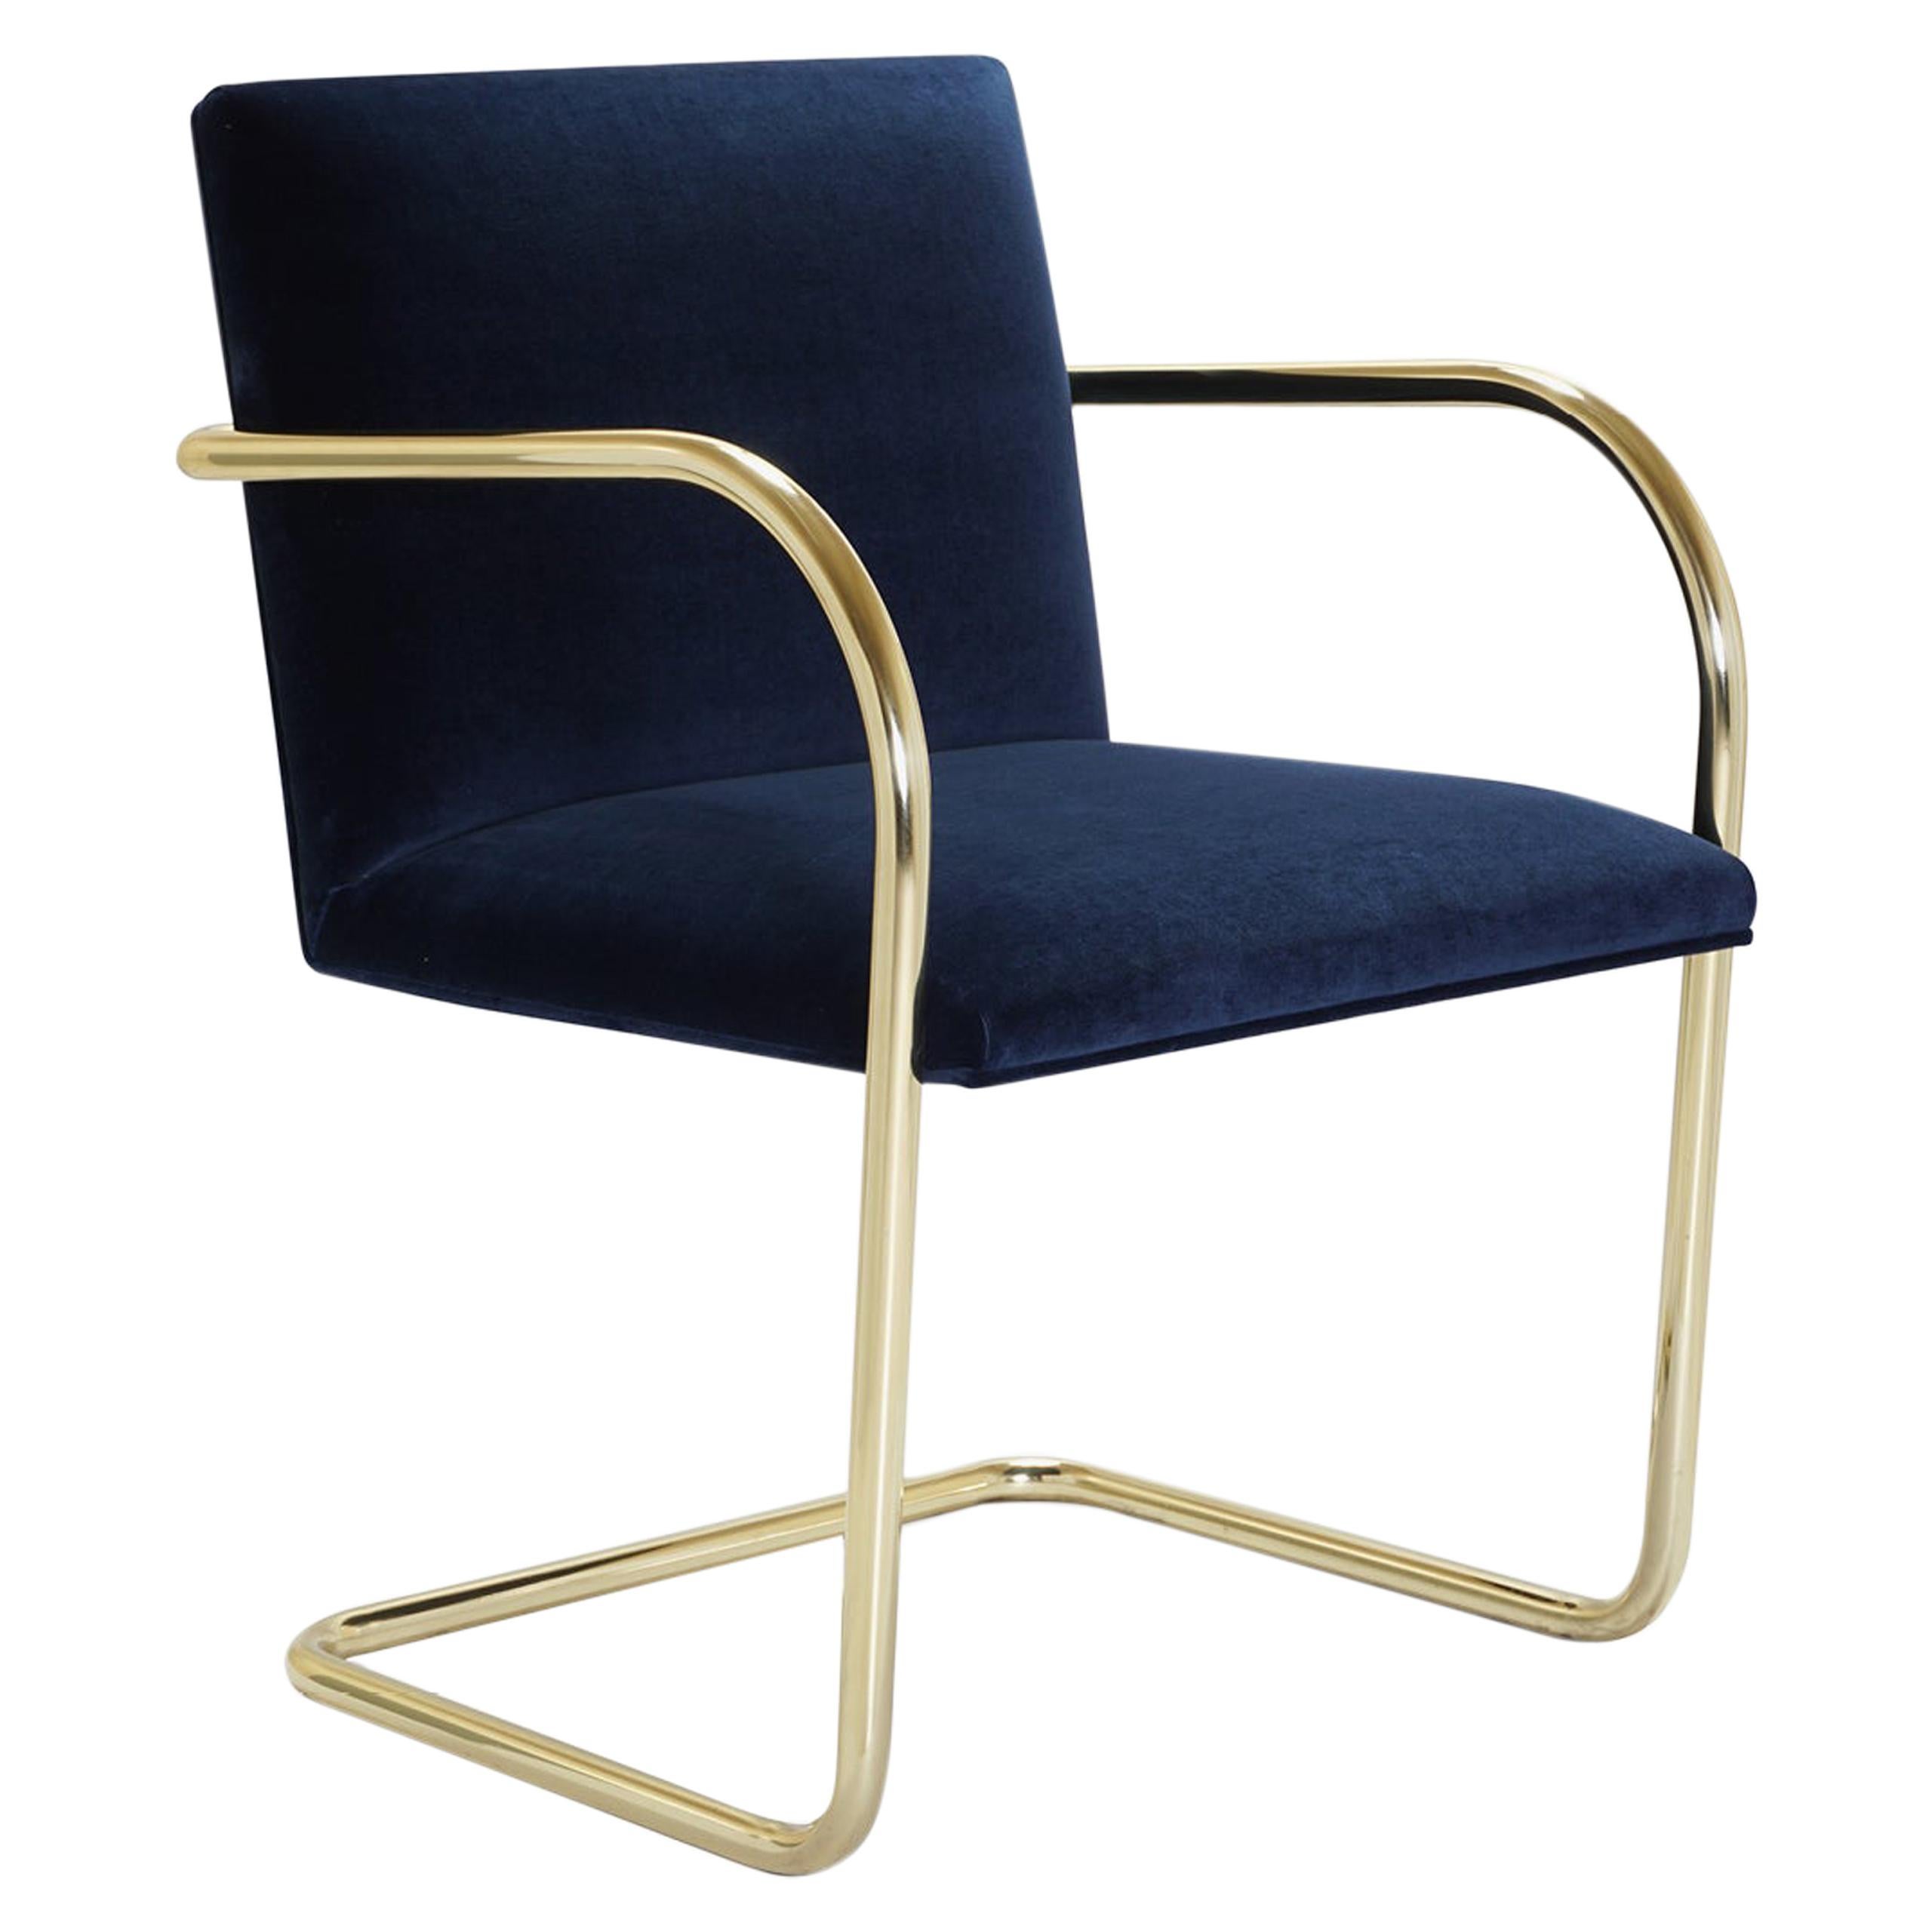 Brno Tubular Chairs in Navy Velvet Polished Brass by Mies Van Der Rohe for Knoll For Sale